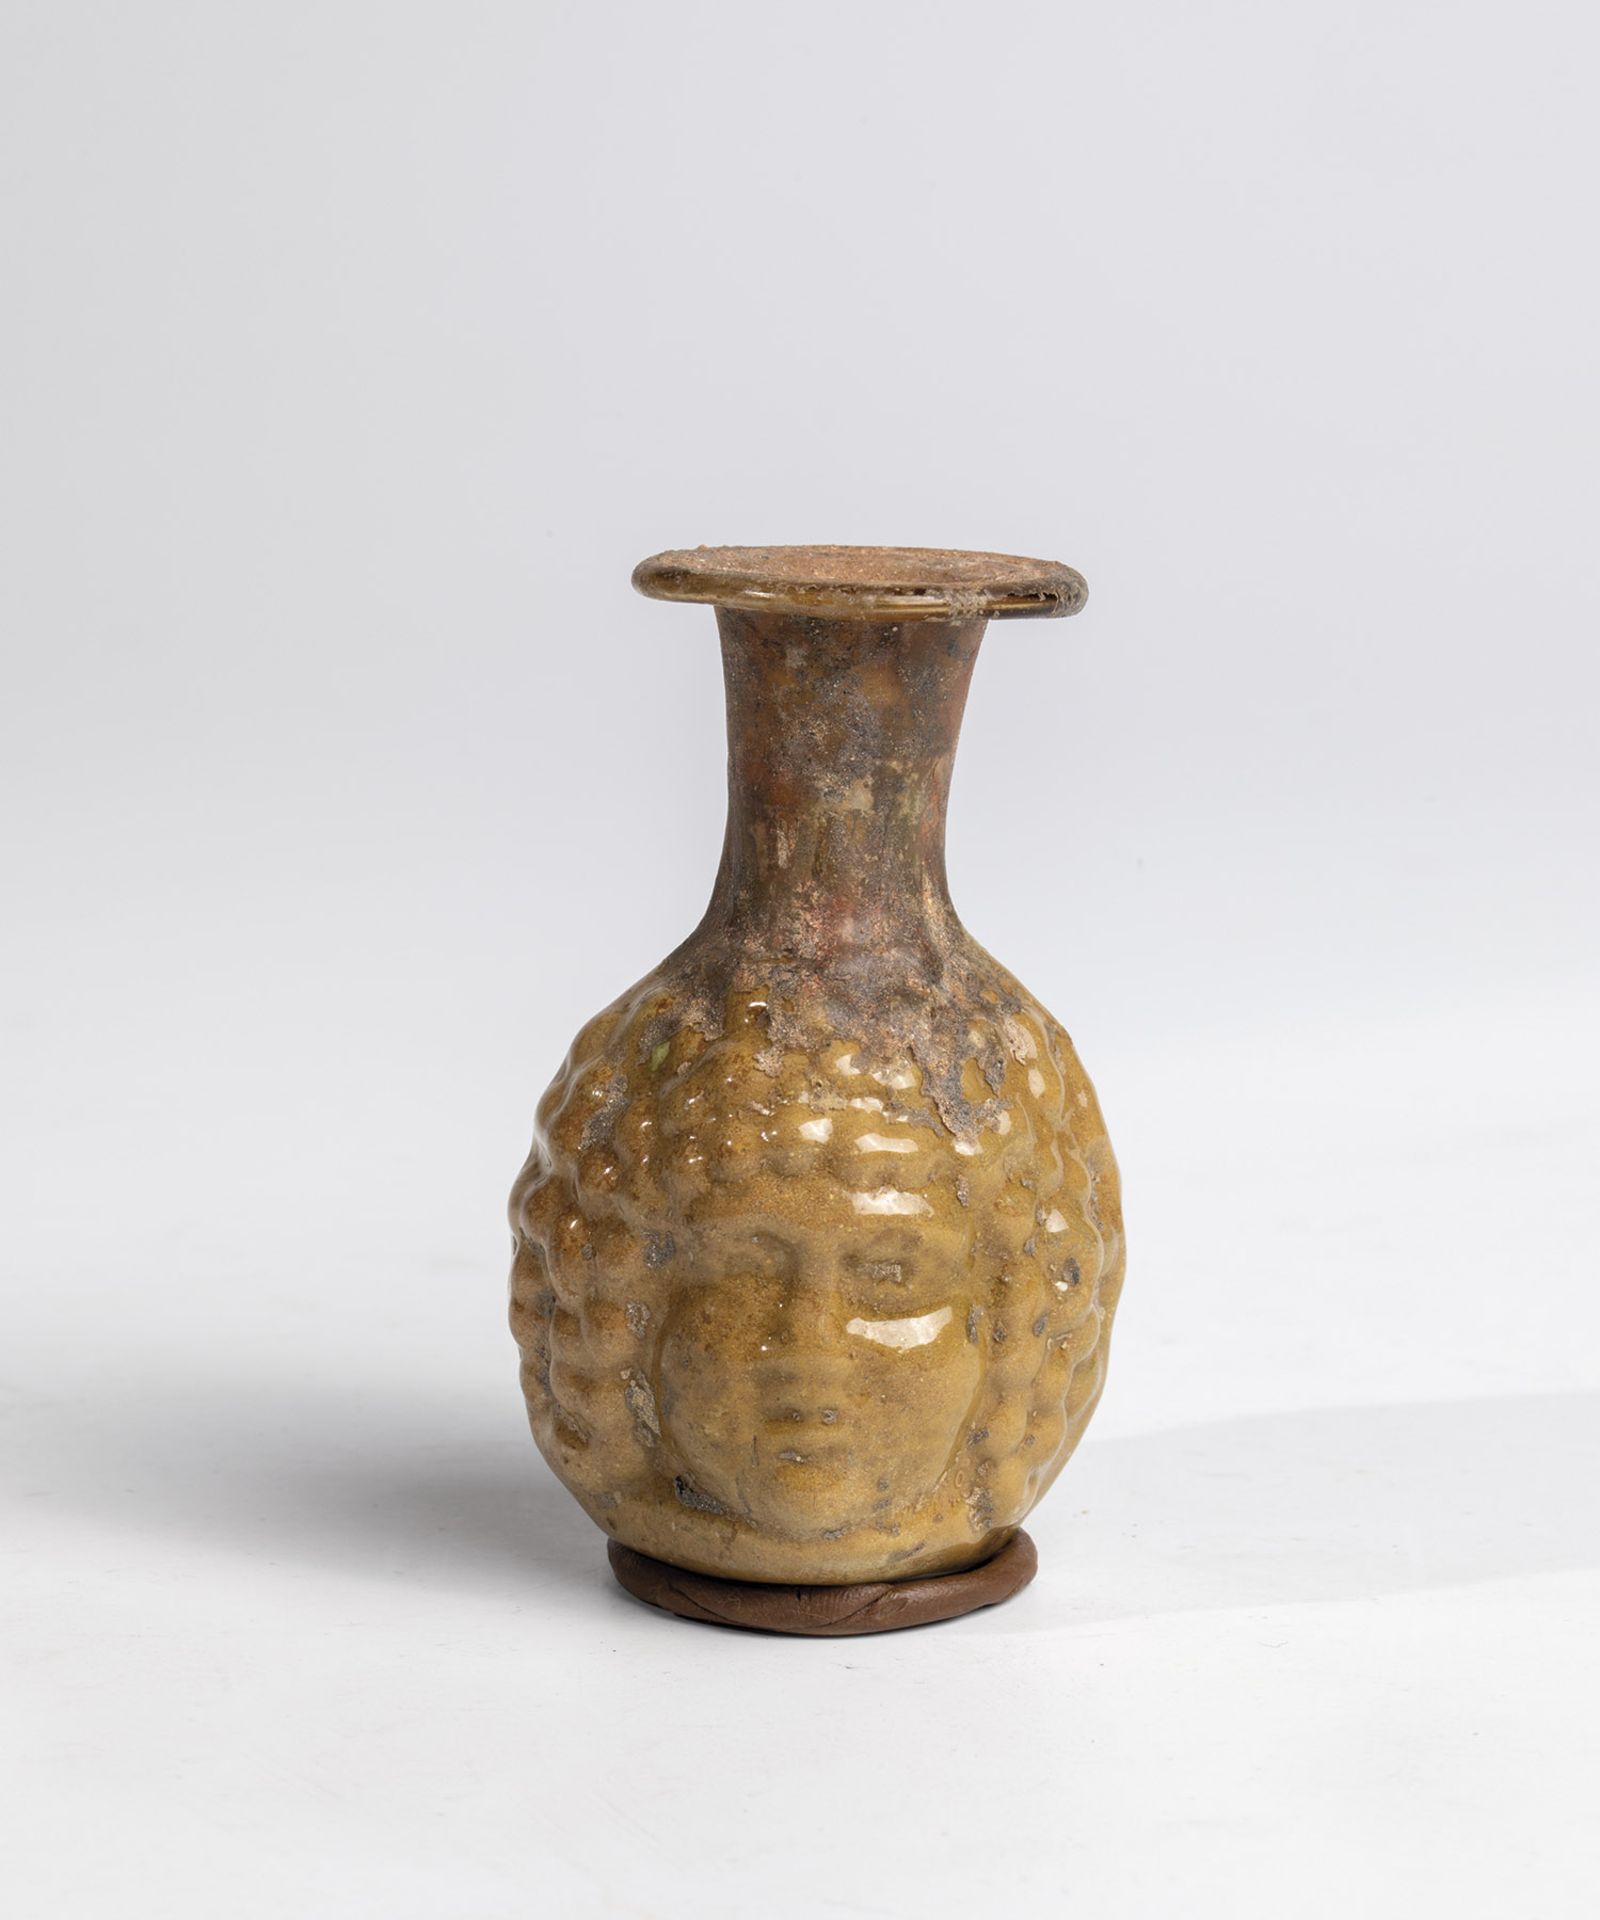 Small double-faced bottle Eastern Mediterranean, 1st-2nd century AD. Slightly brownish glass blown